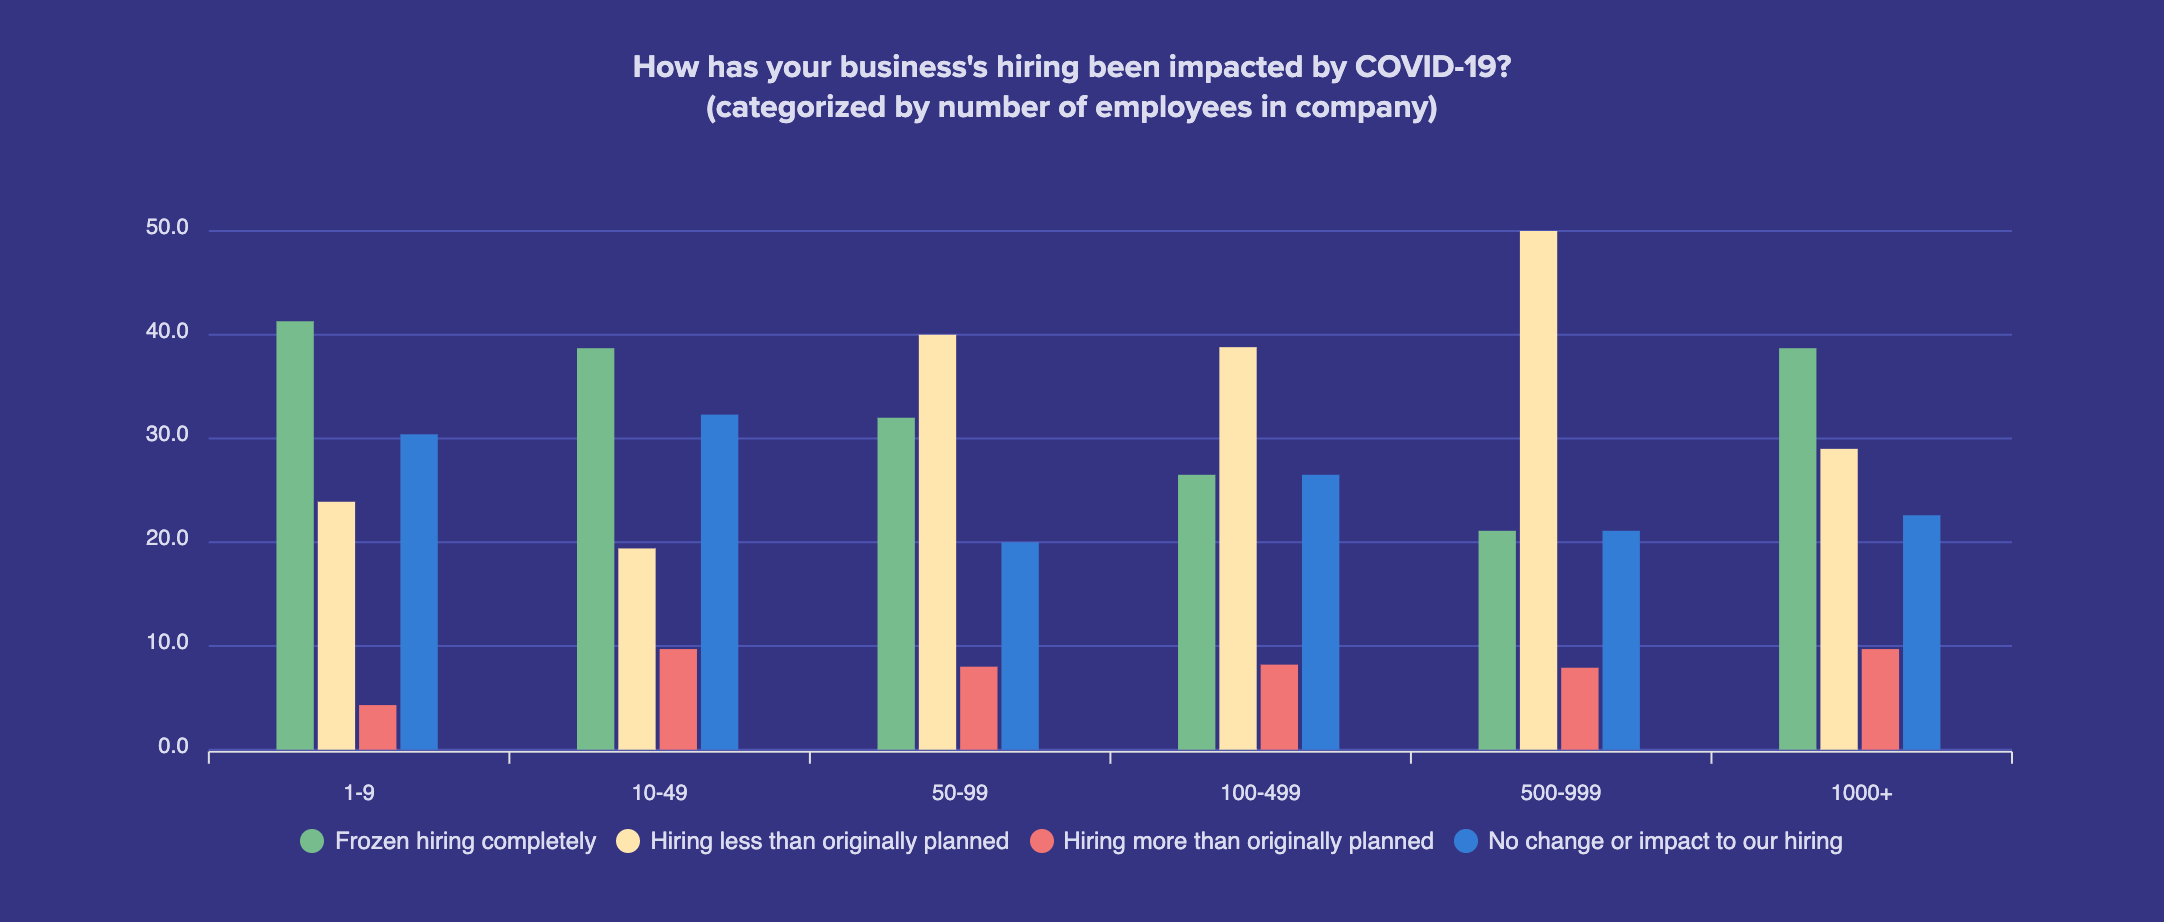 How has your business's hiring been impacted by COVID-19? (categorized by number of employees in company)